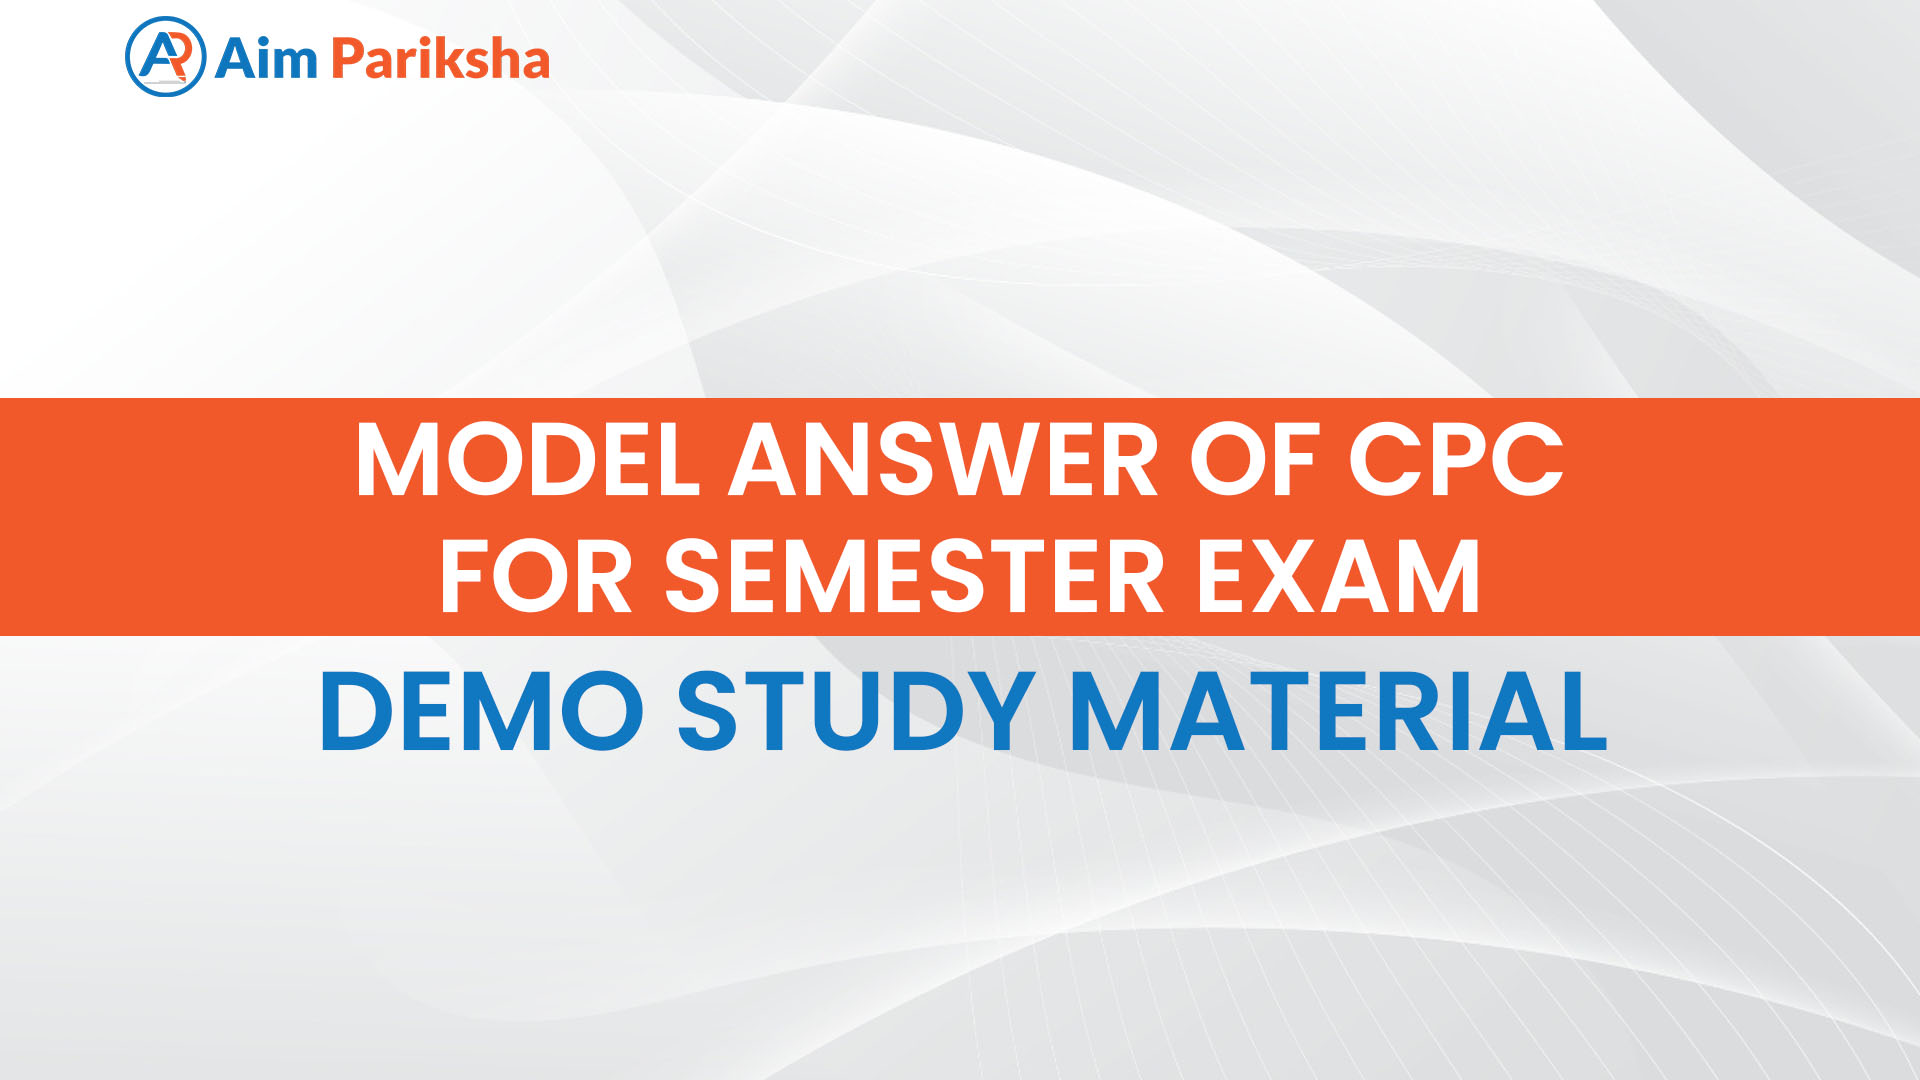 Model answer of CPC for Semester exam